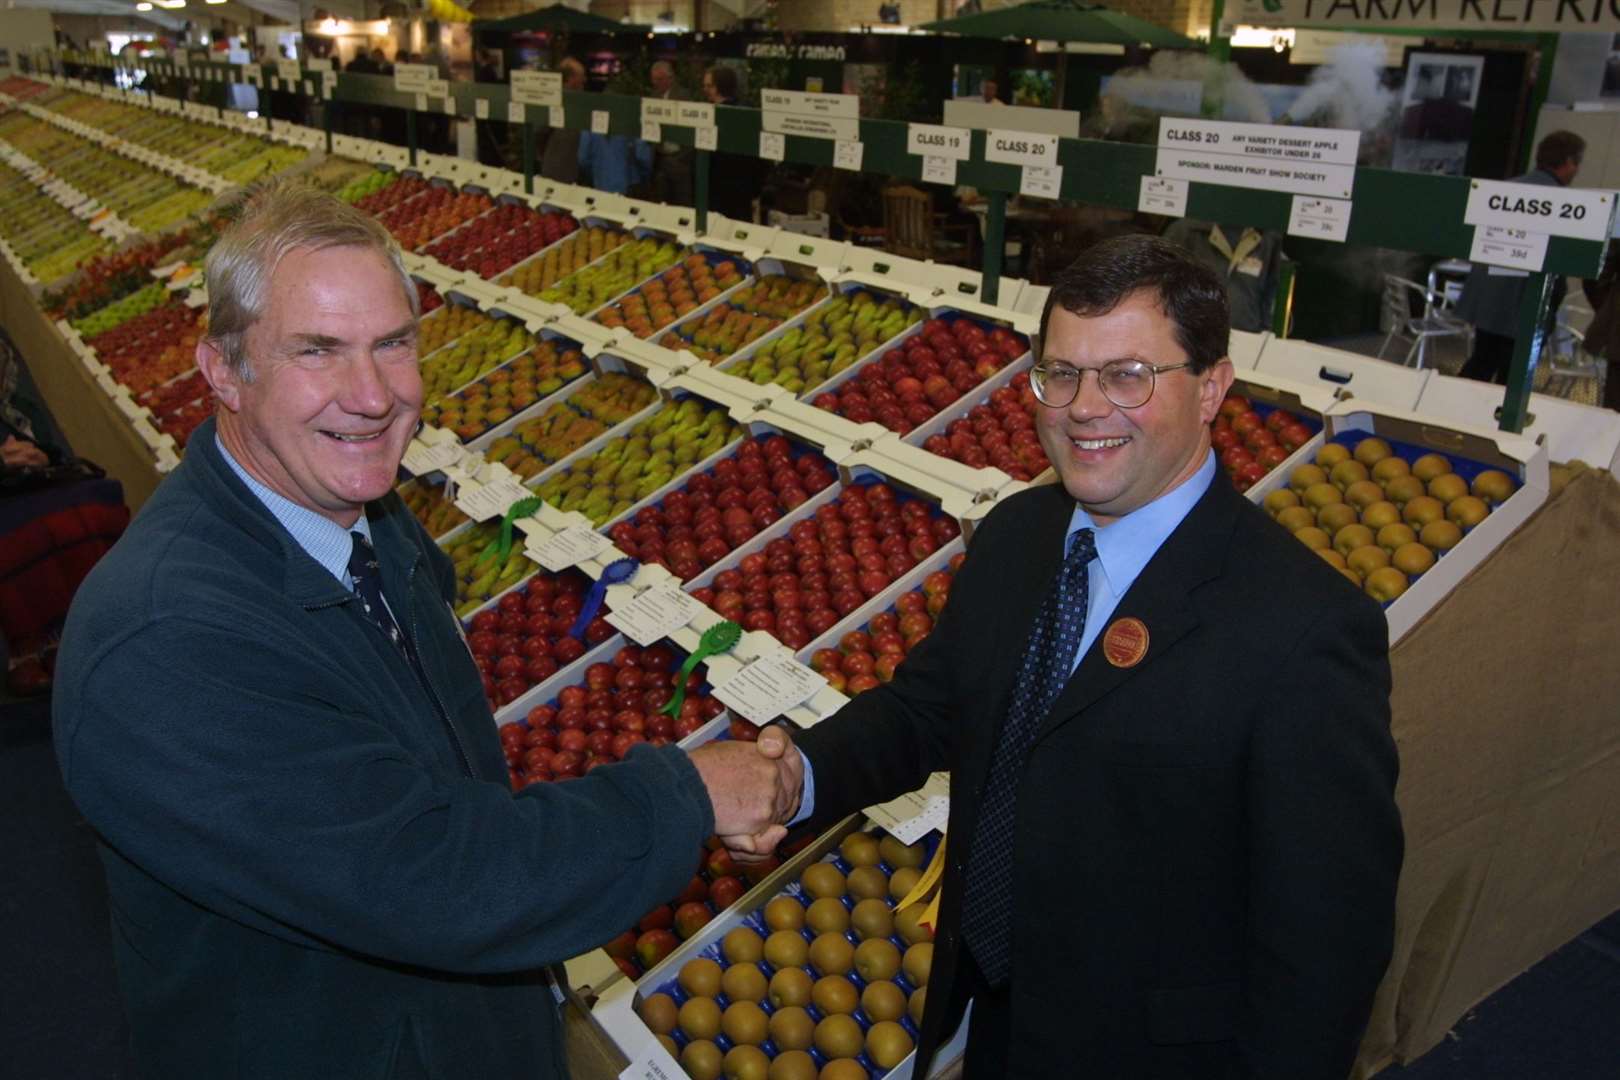 James Smith's father Alan Smith, left, receiving the Bonanza prize from the then chairman of the Marden Fruit Show, Robert Mitchell, in 2003